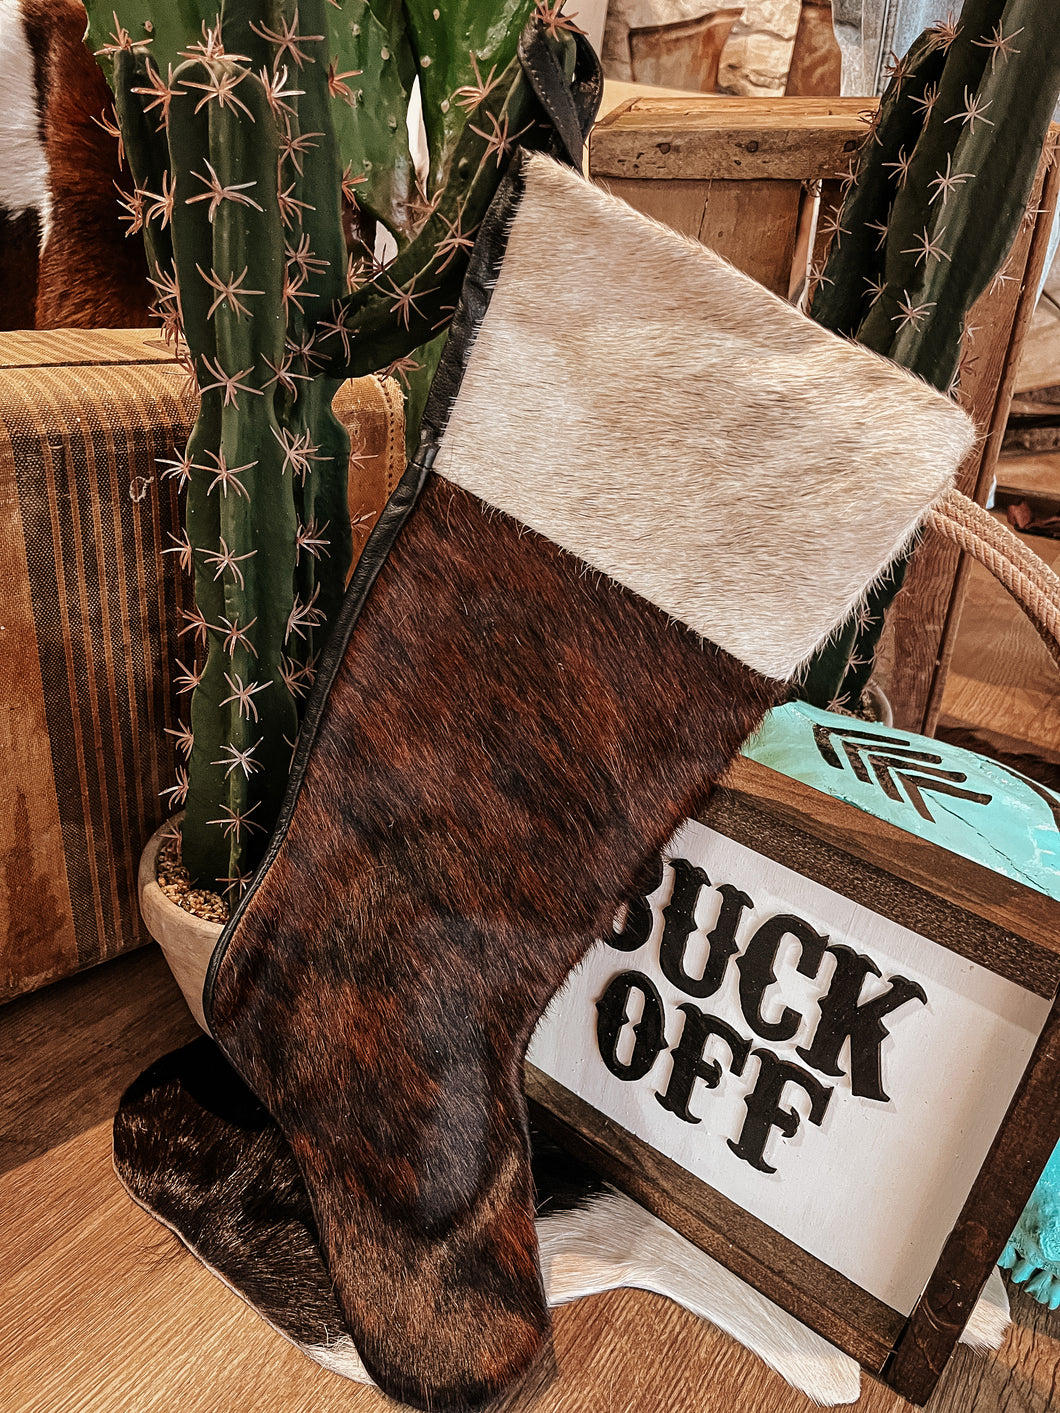 The Cowhide Stockings